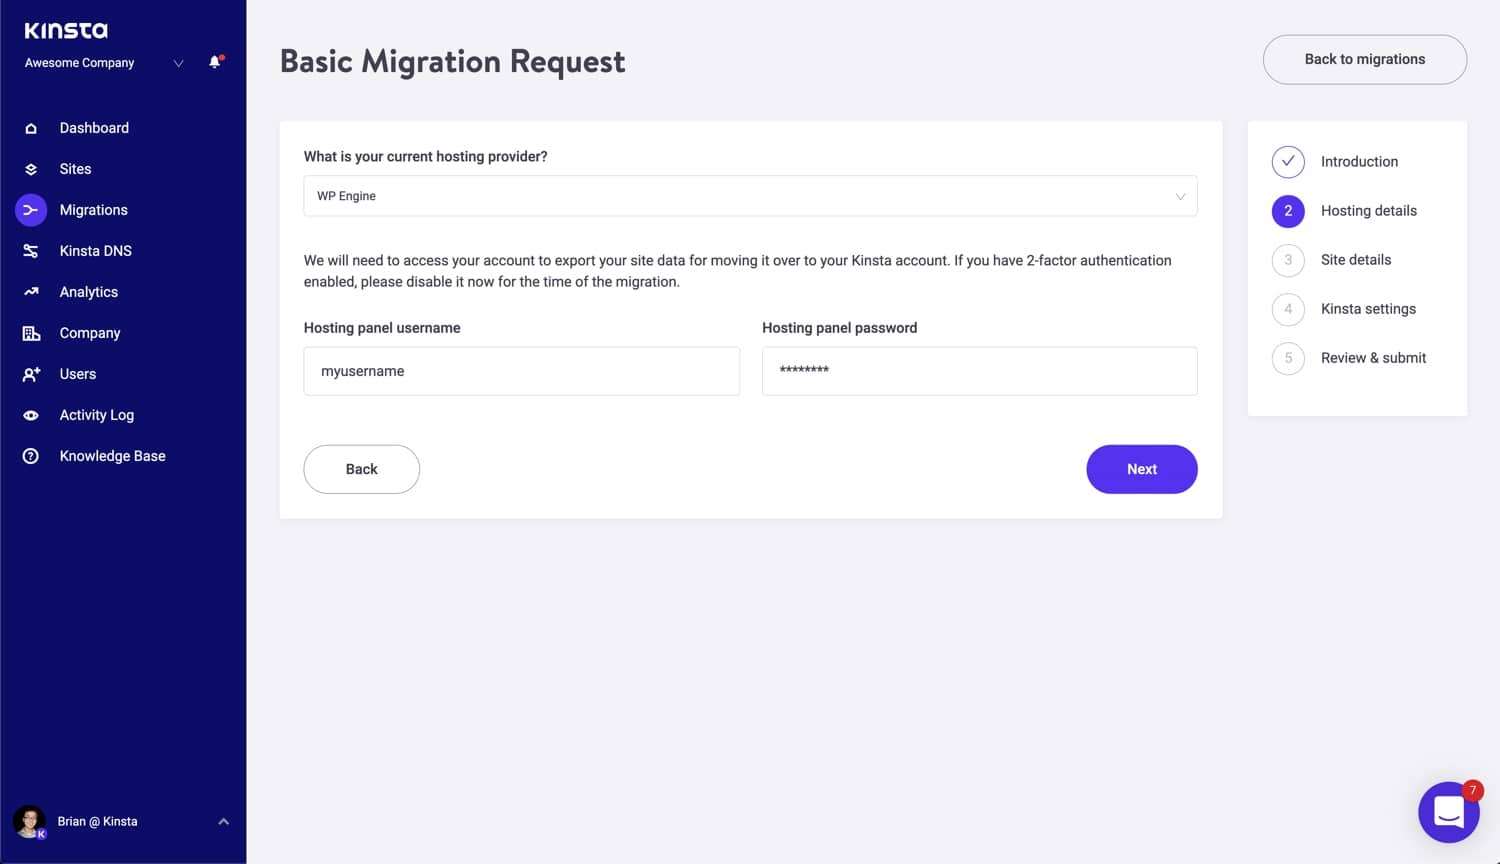 Add your hosting details to your basic migration request.